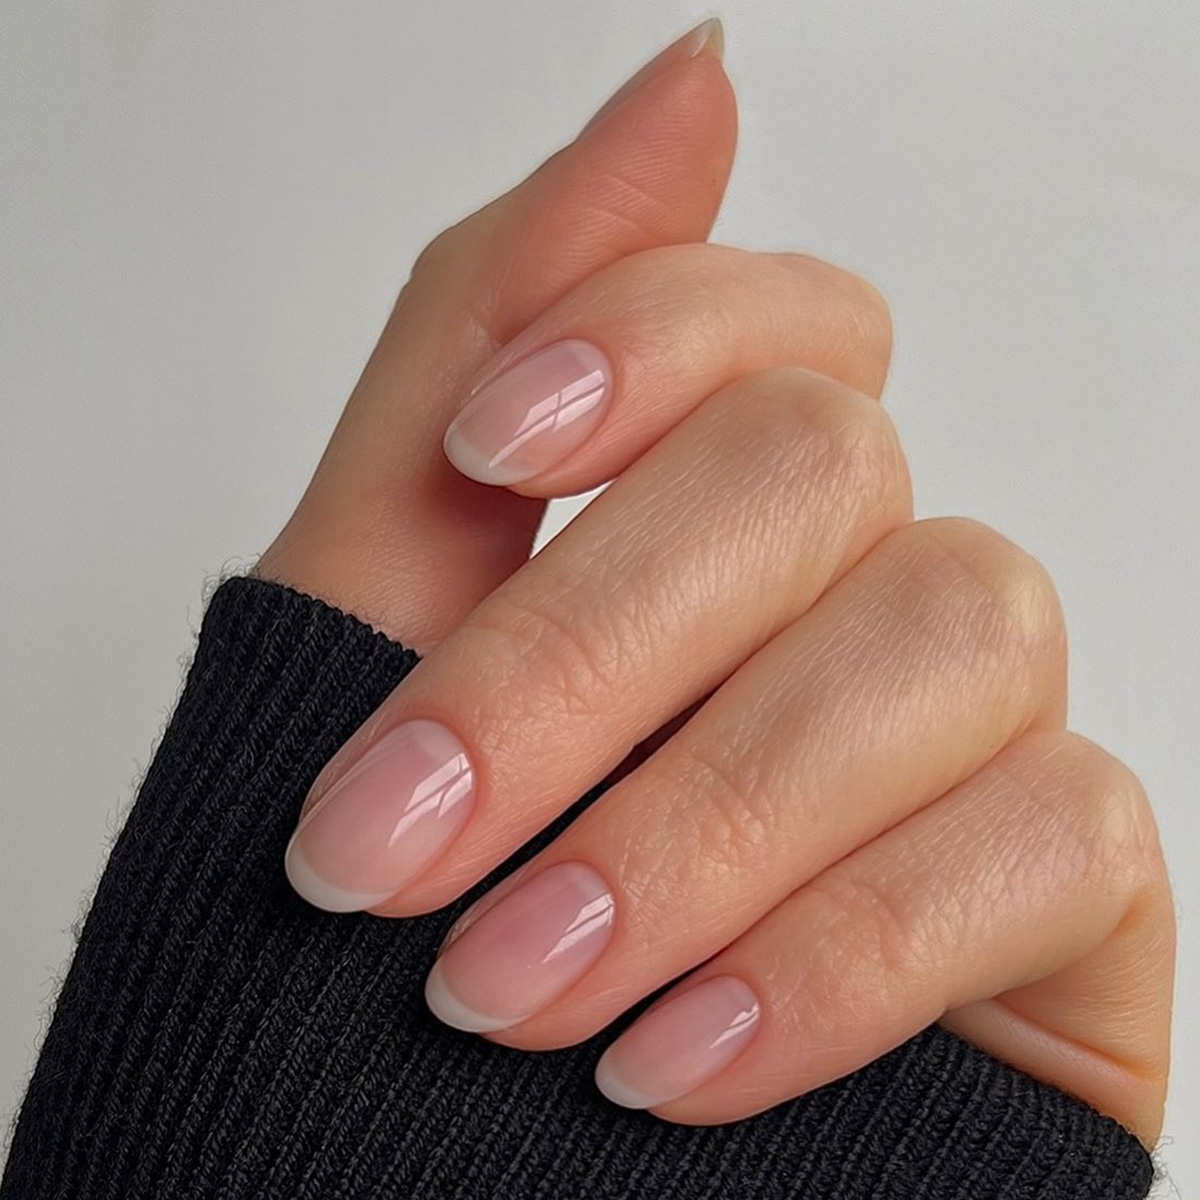 French Tips Aren't My Thing—I'm Requesting The "Naked French" Instead To Look Polished